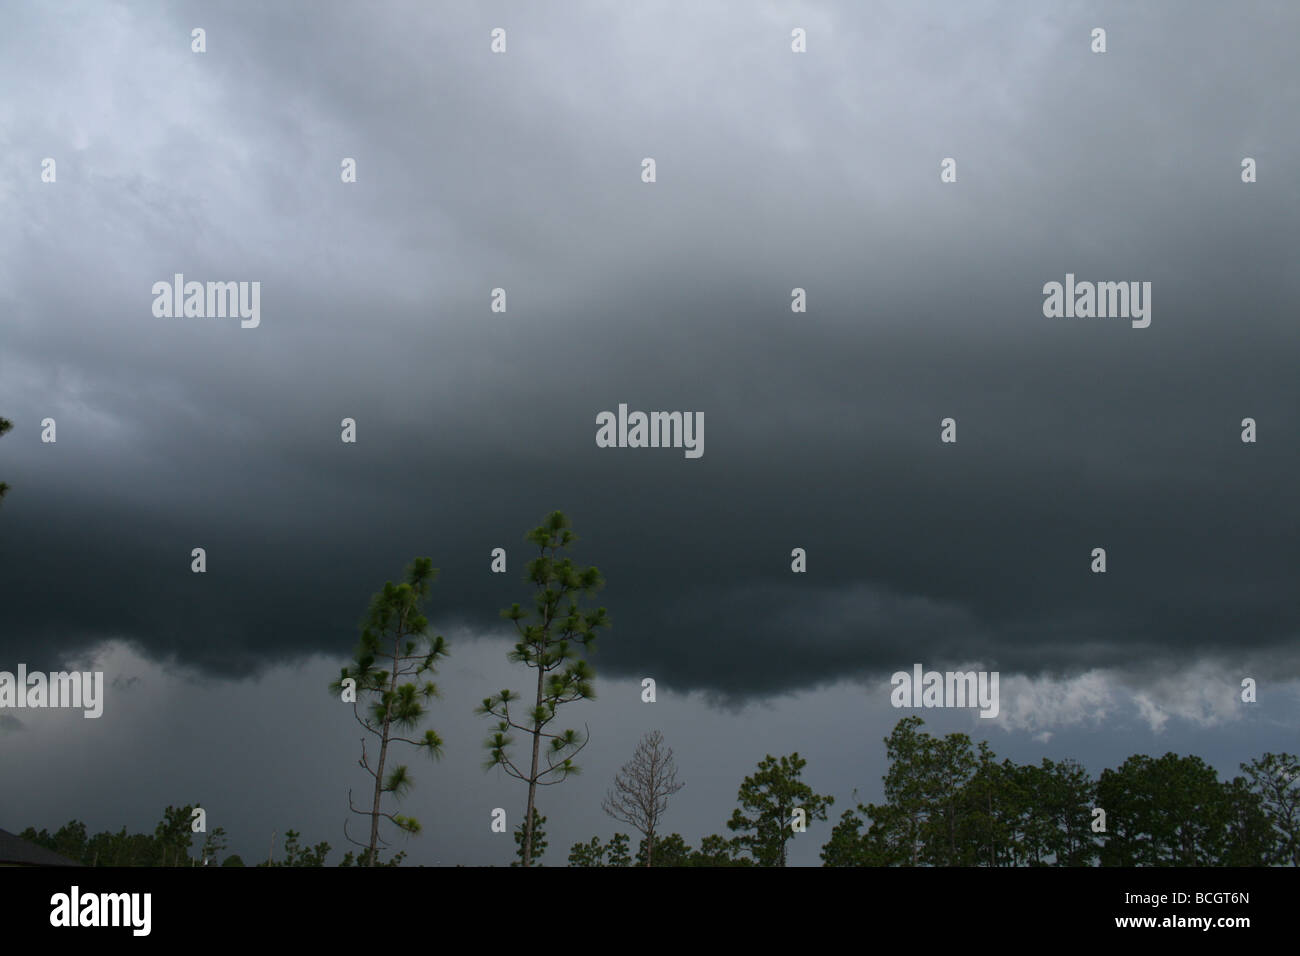 Dark storm clouds moving in over pine trees, Florida. Stock Photo